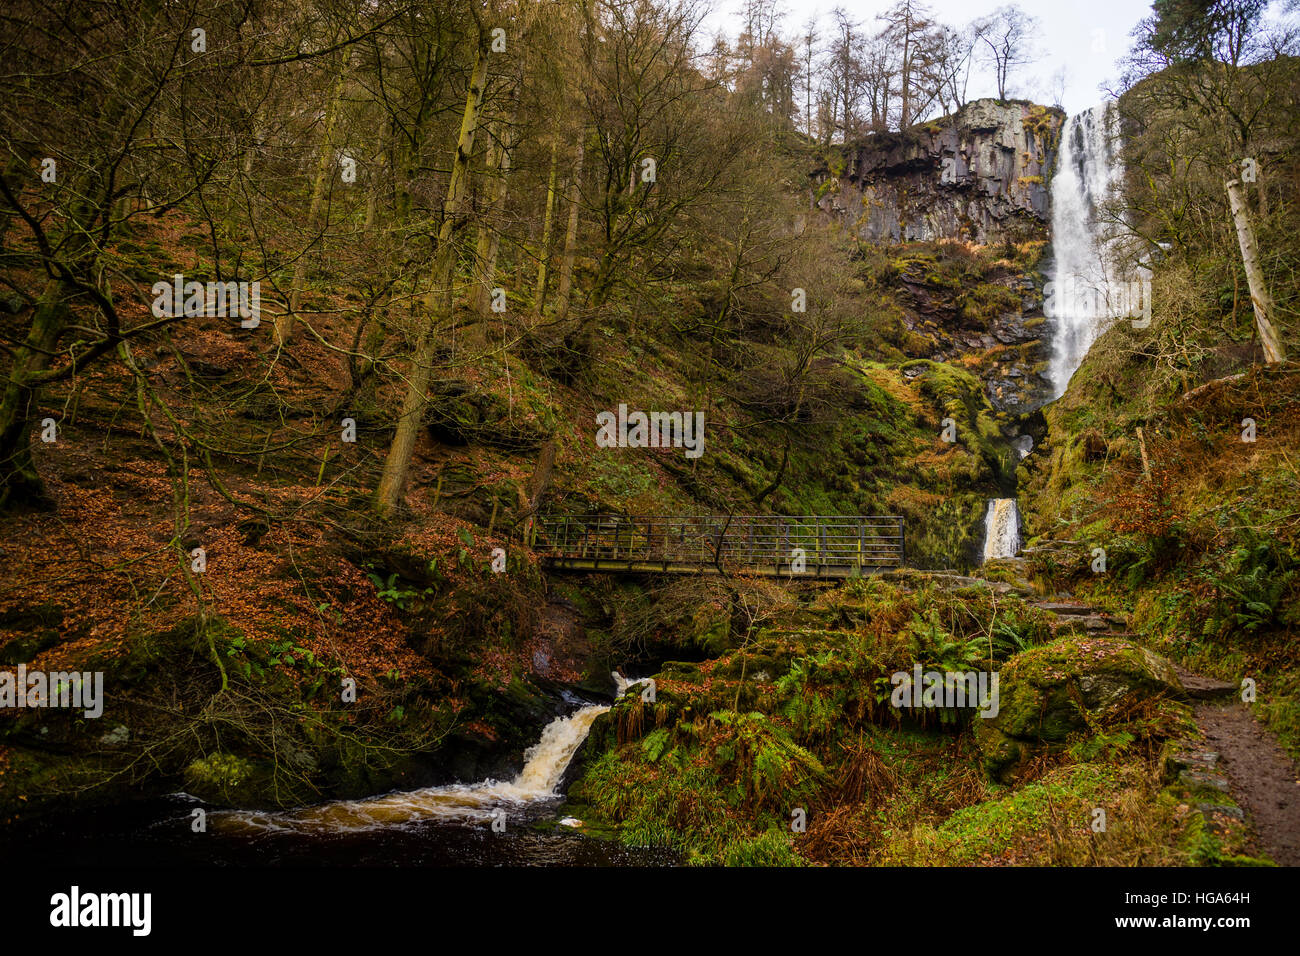 Natural phenomena in the UK: Pistyll Rheadr waterfall,  Llanrheadr ym Mochnant, Powys Wales UK Christmas Day, 25 December 2016 - often referred to as the tallest highest waterfall in England and Wales,  with the waters of the River Disgynfa falling over 73 m (240 foot) . One of the 'Seven Wonders of Wales ' and a Site of Special Scientific Interest (SSSI) Stock Photo